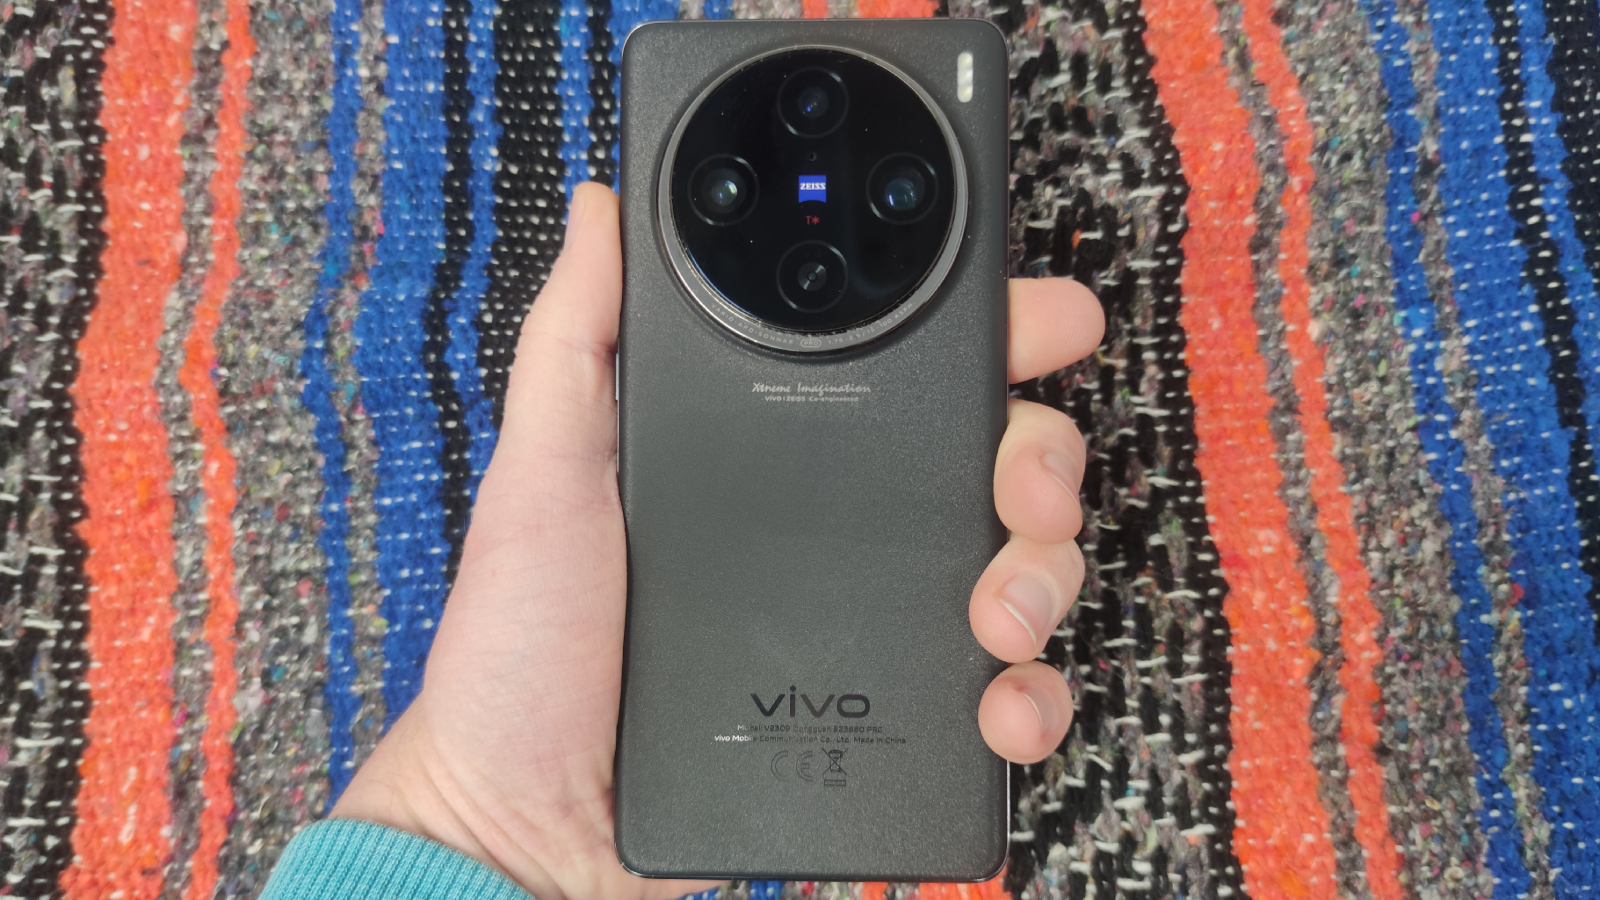 The Vivo X100 Pro on a colored background.